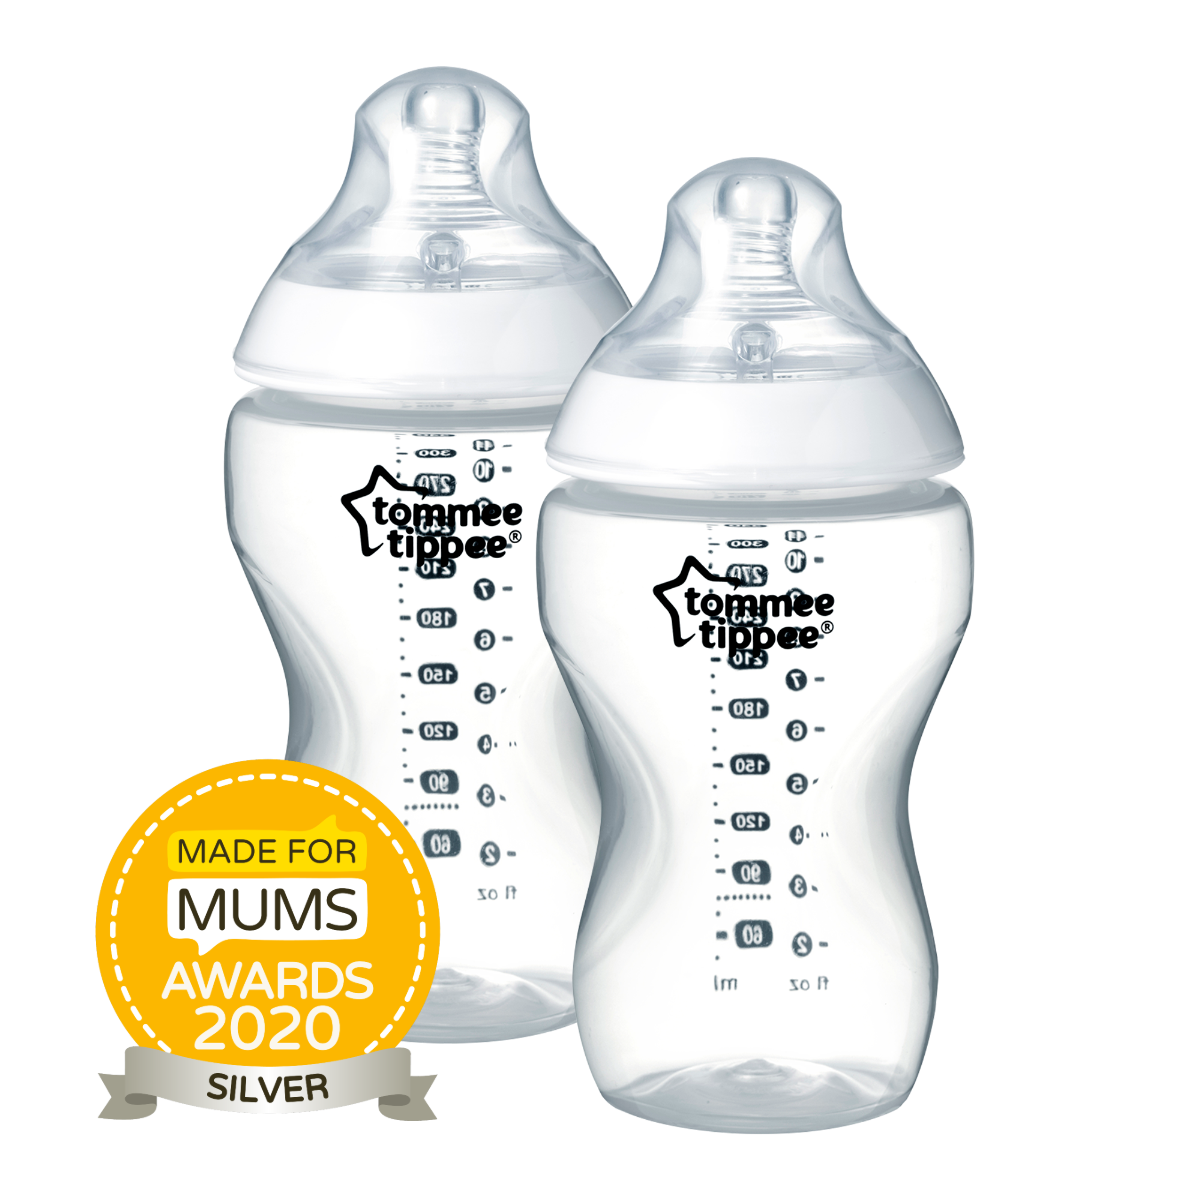 Closer to Nature Baby Bottle 340ml - 2 pack